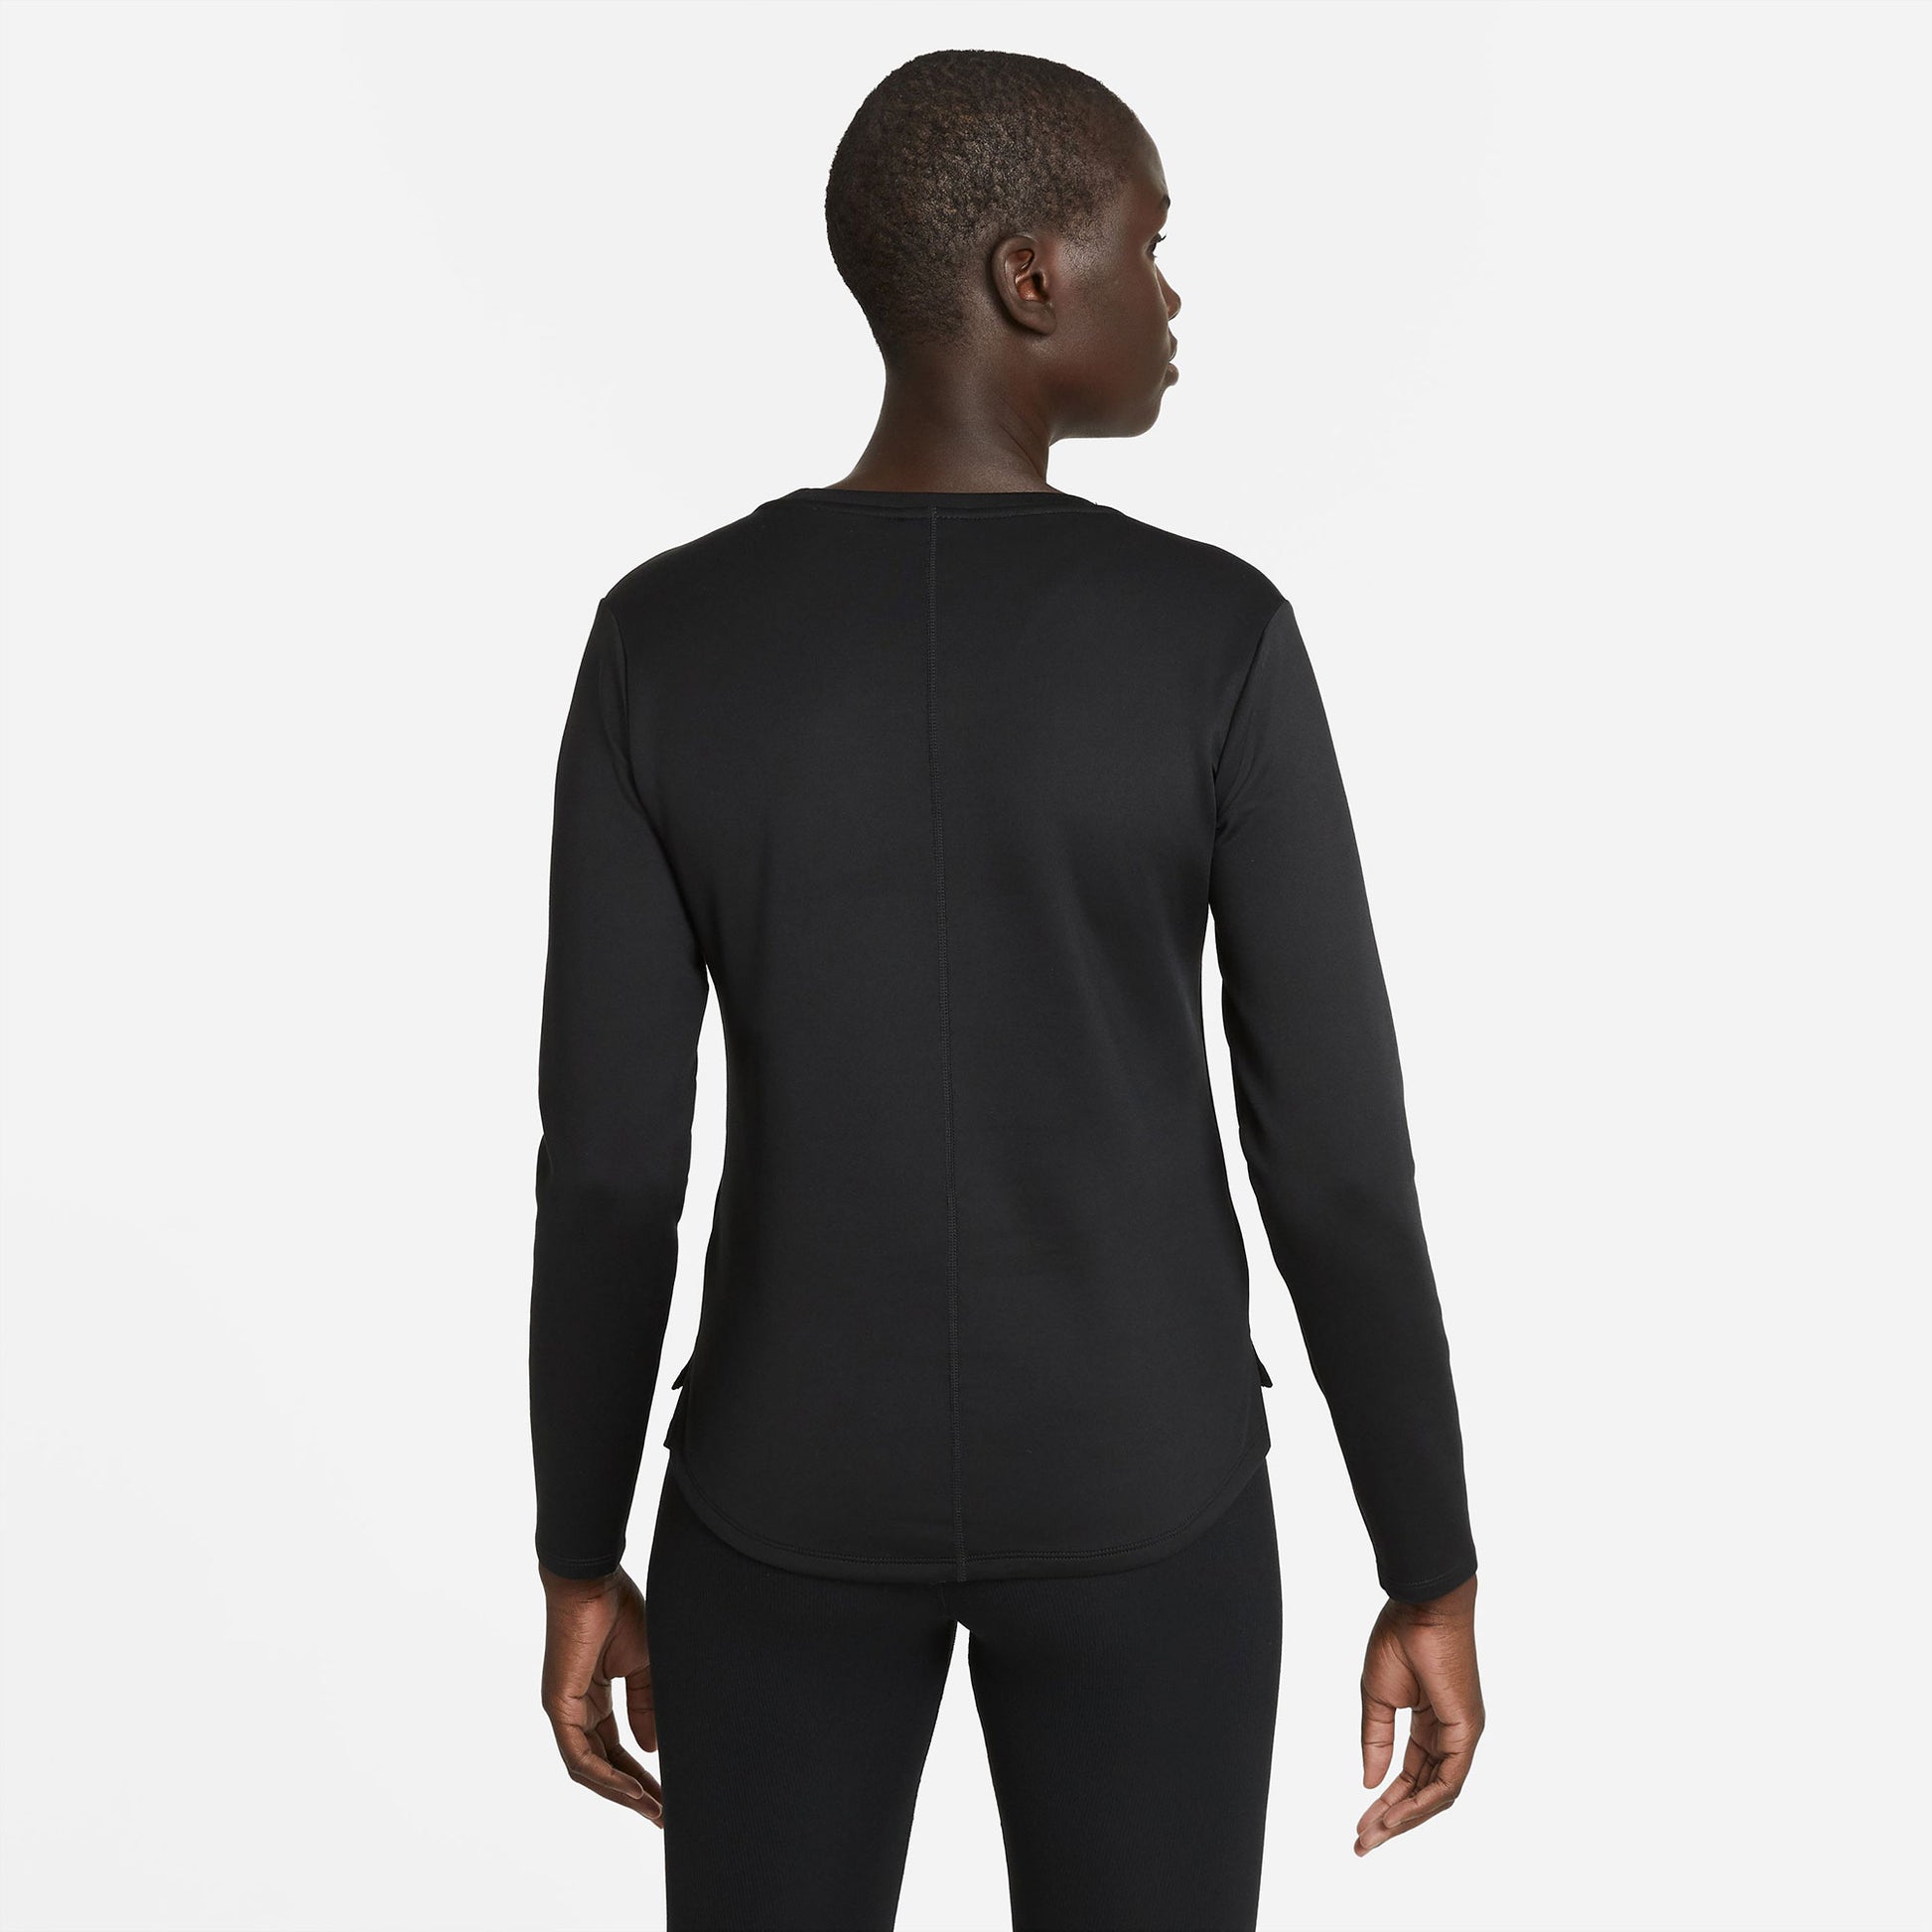 Nike One Therma-FIT Women's Long-Sleeve Top Black (2)